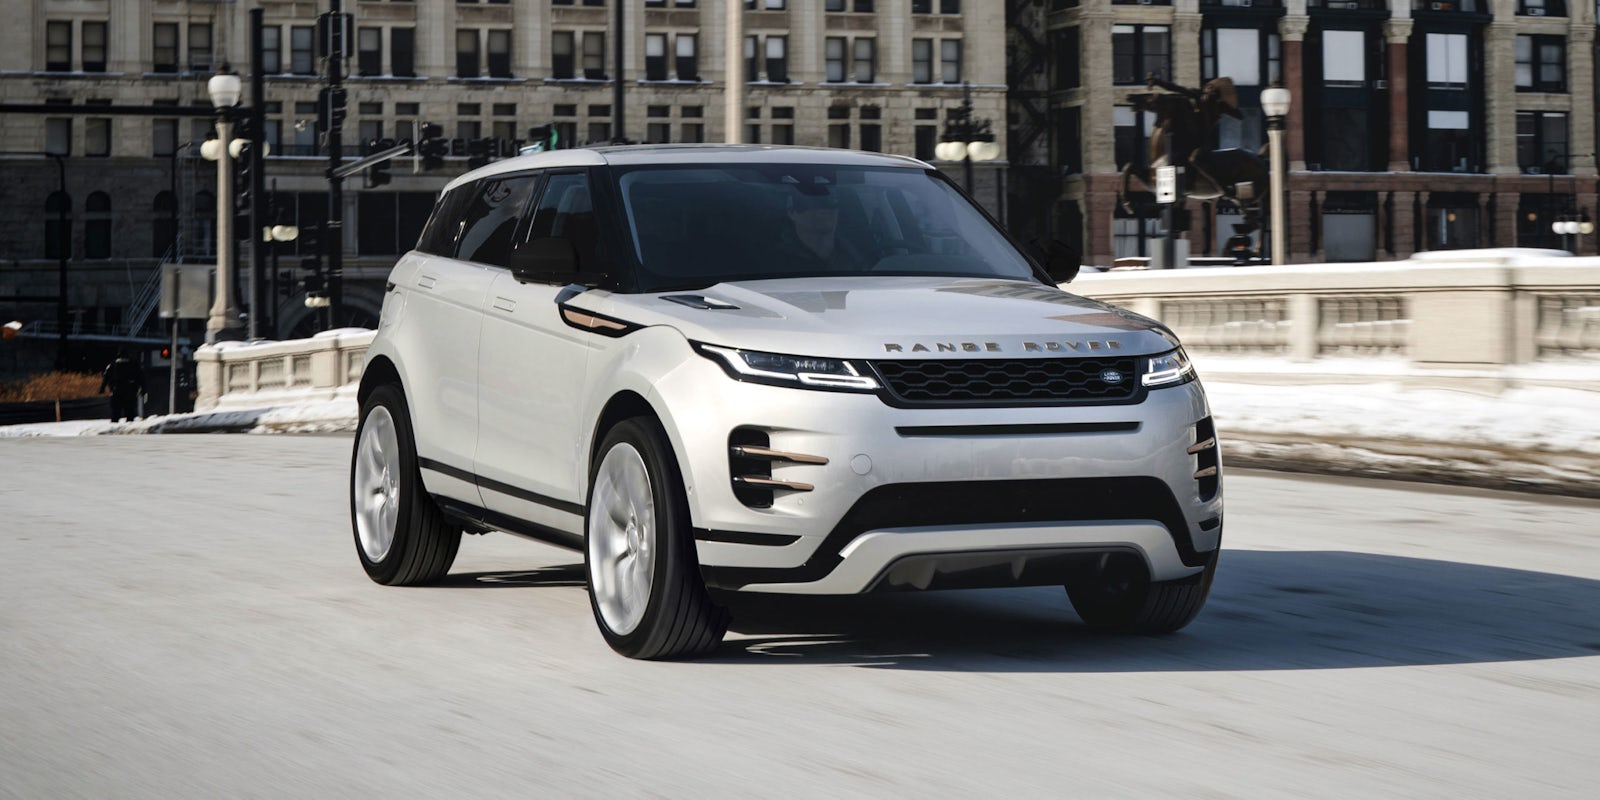 Range Rover Evoque Hybrid Lease  - Phev Derivative Australian Introduction Date Is To Be Confirmed.